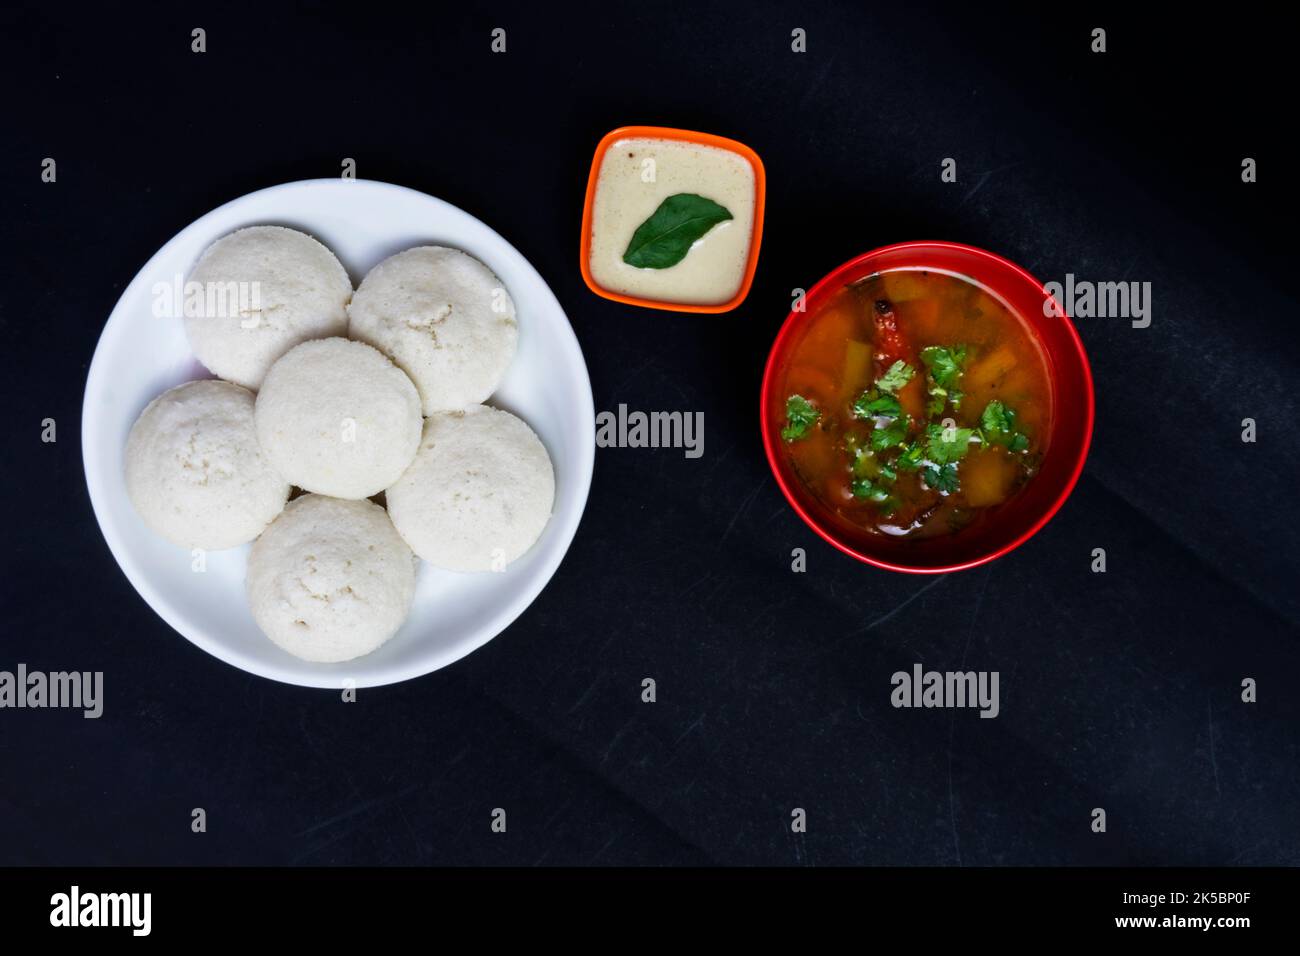 Idly In White Plate, Sambar In Red Bowl with Coconut Chutney In Bowl, Isolated On Black Background, Idly In White Plate, Sambar In Red Round Bowl Stock Photo